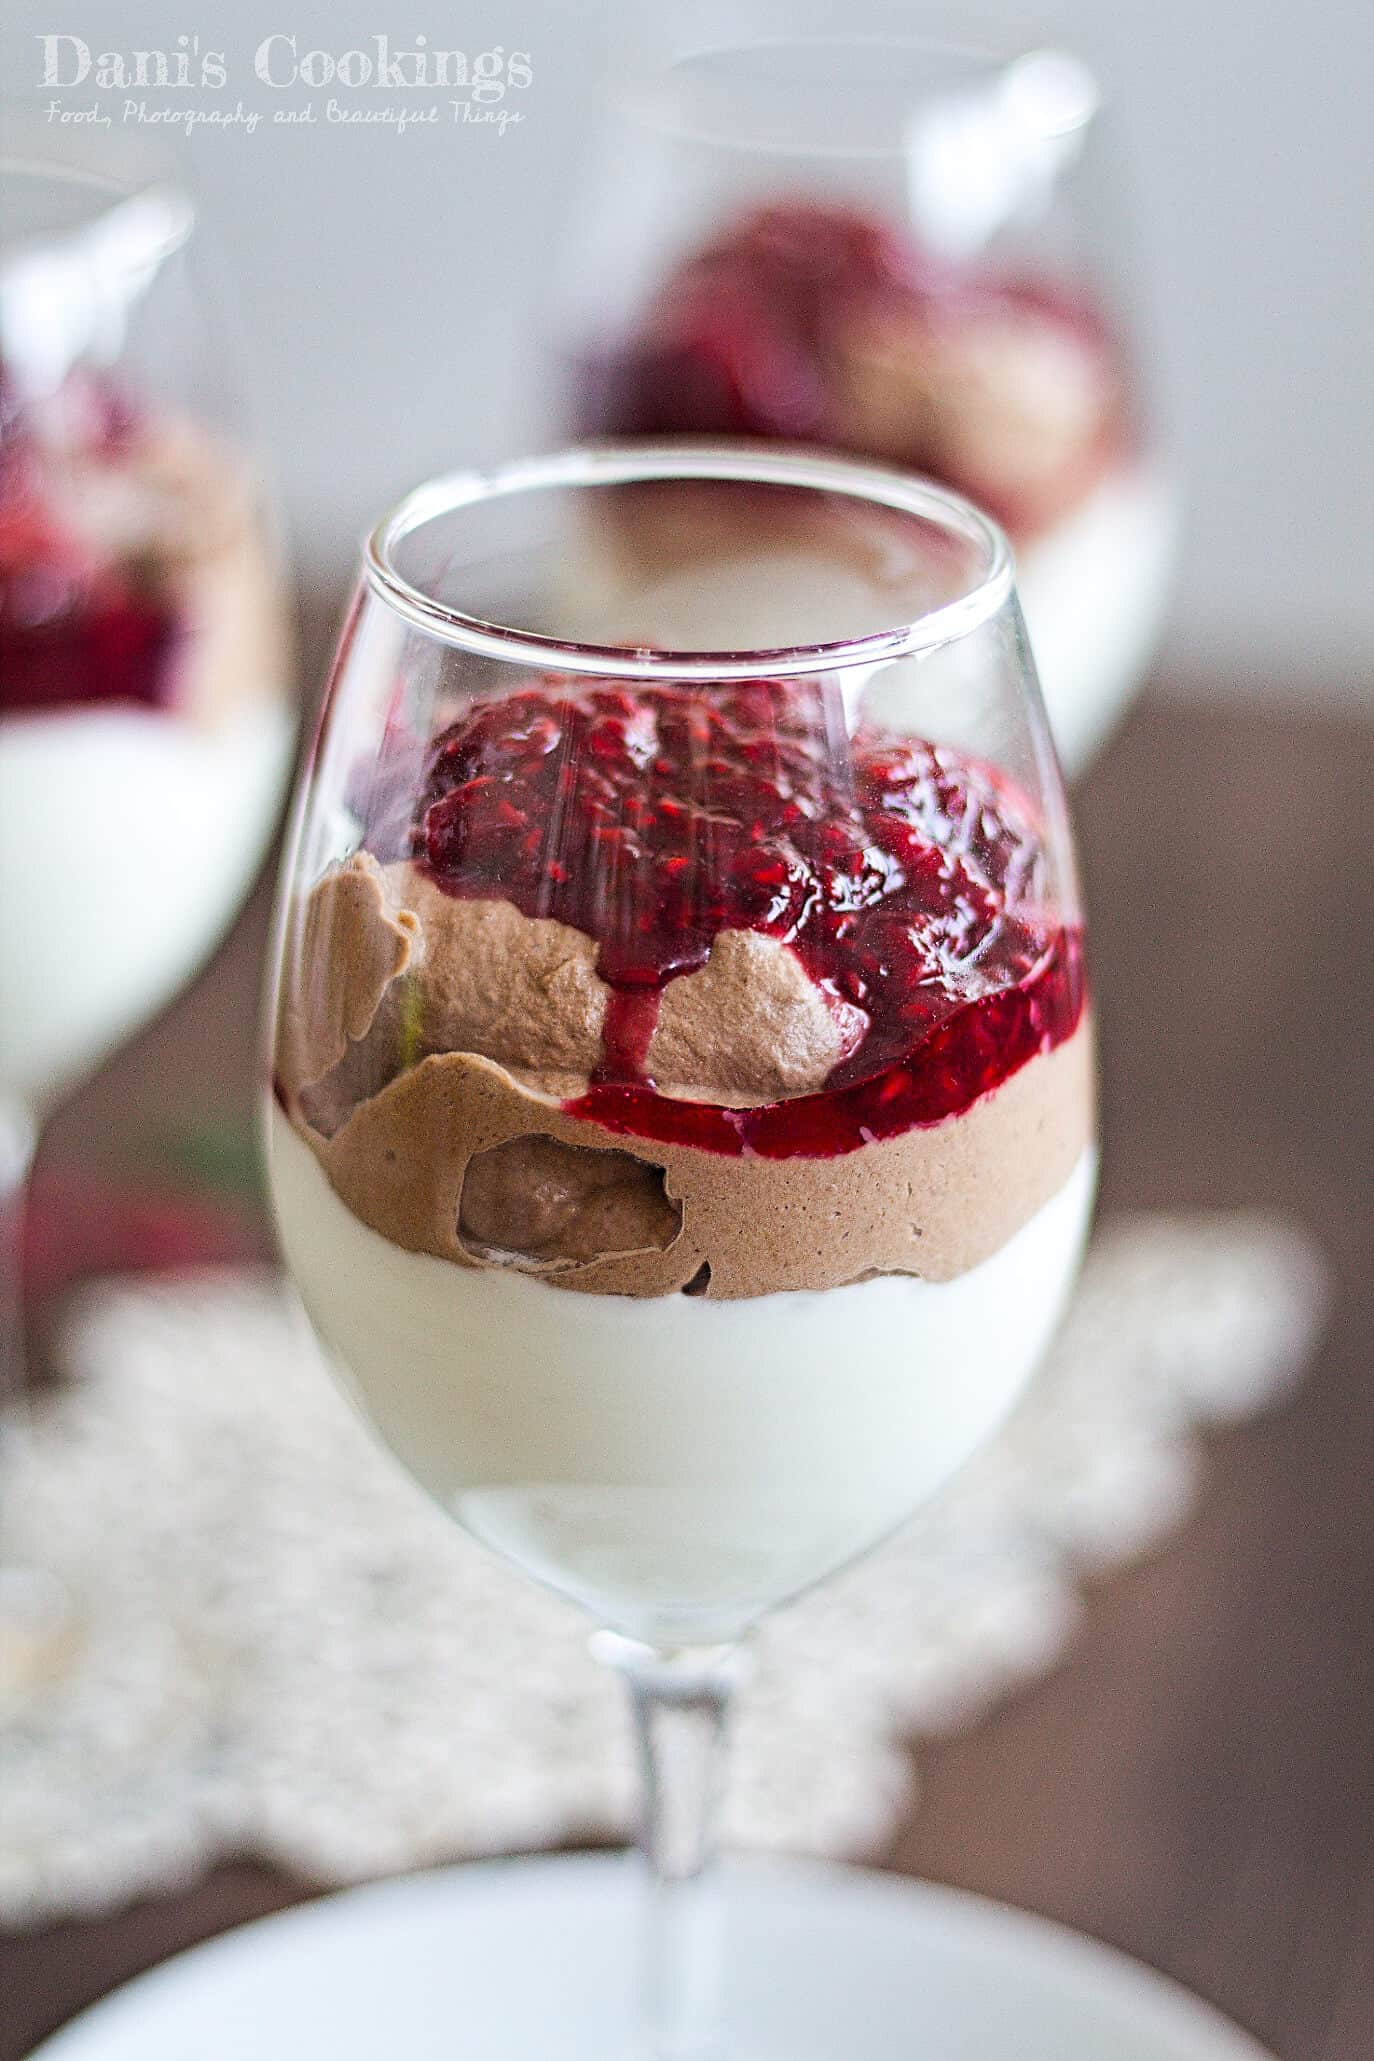 This easy and delicious Double Chocolate Mousse with Raspberry sauce is made with only 5 ingredients! Find the recipe at daniscookings.com